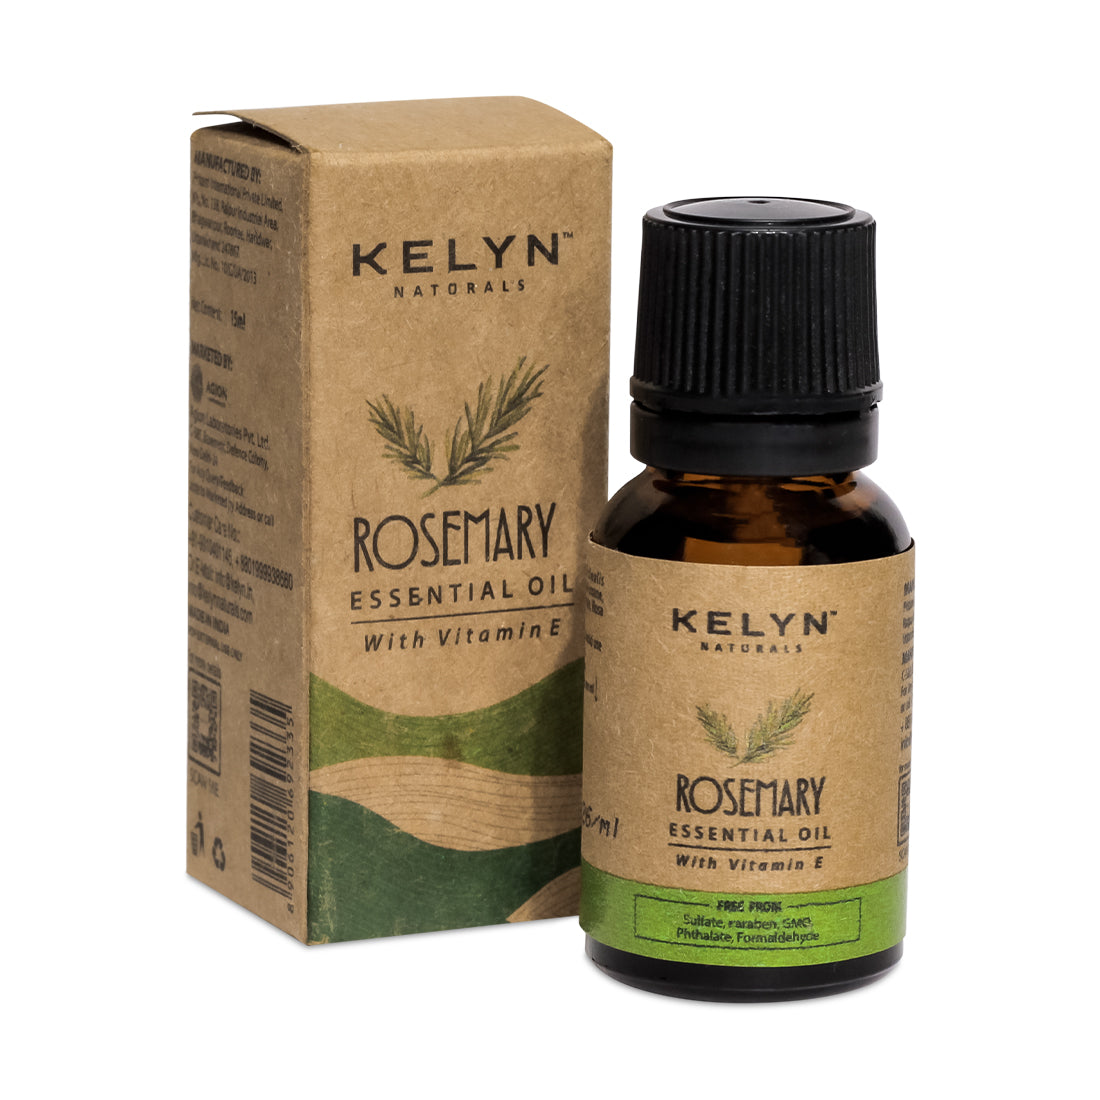 Kelyn Rosemary Essential Oil with Vitamin E - 15ml